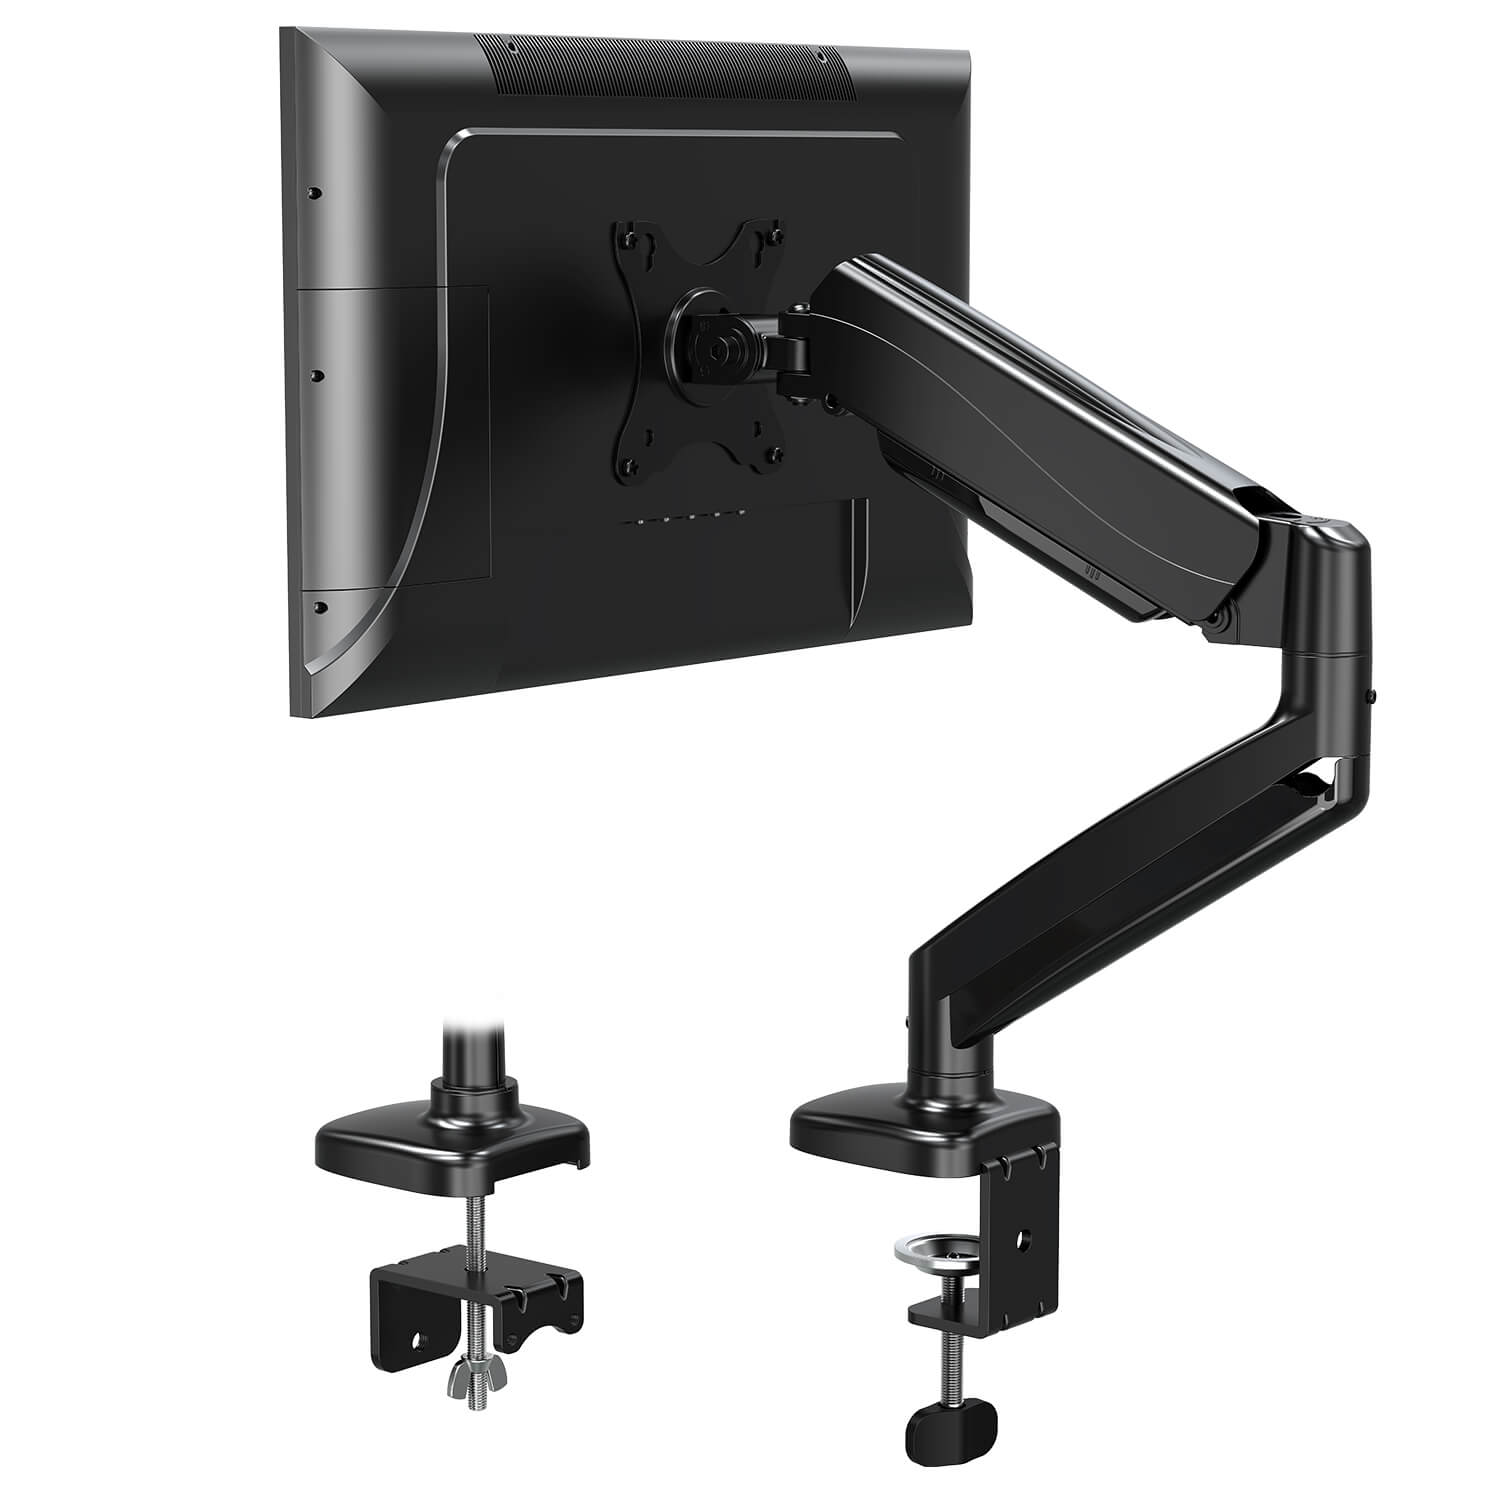 Monitor Stand - 42 inches tall - Freestanding